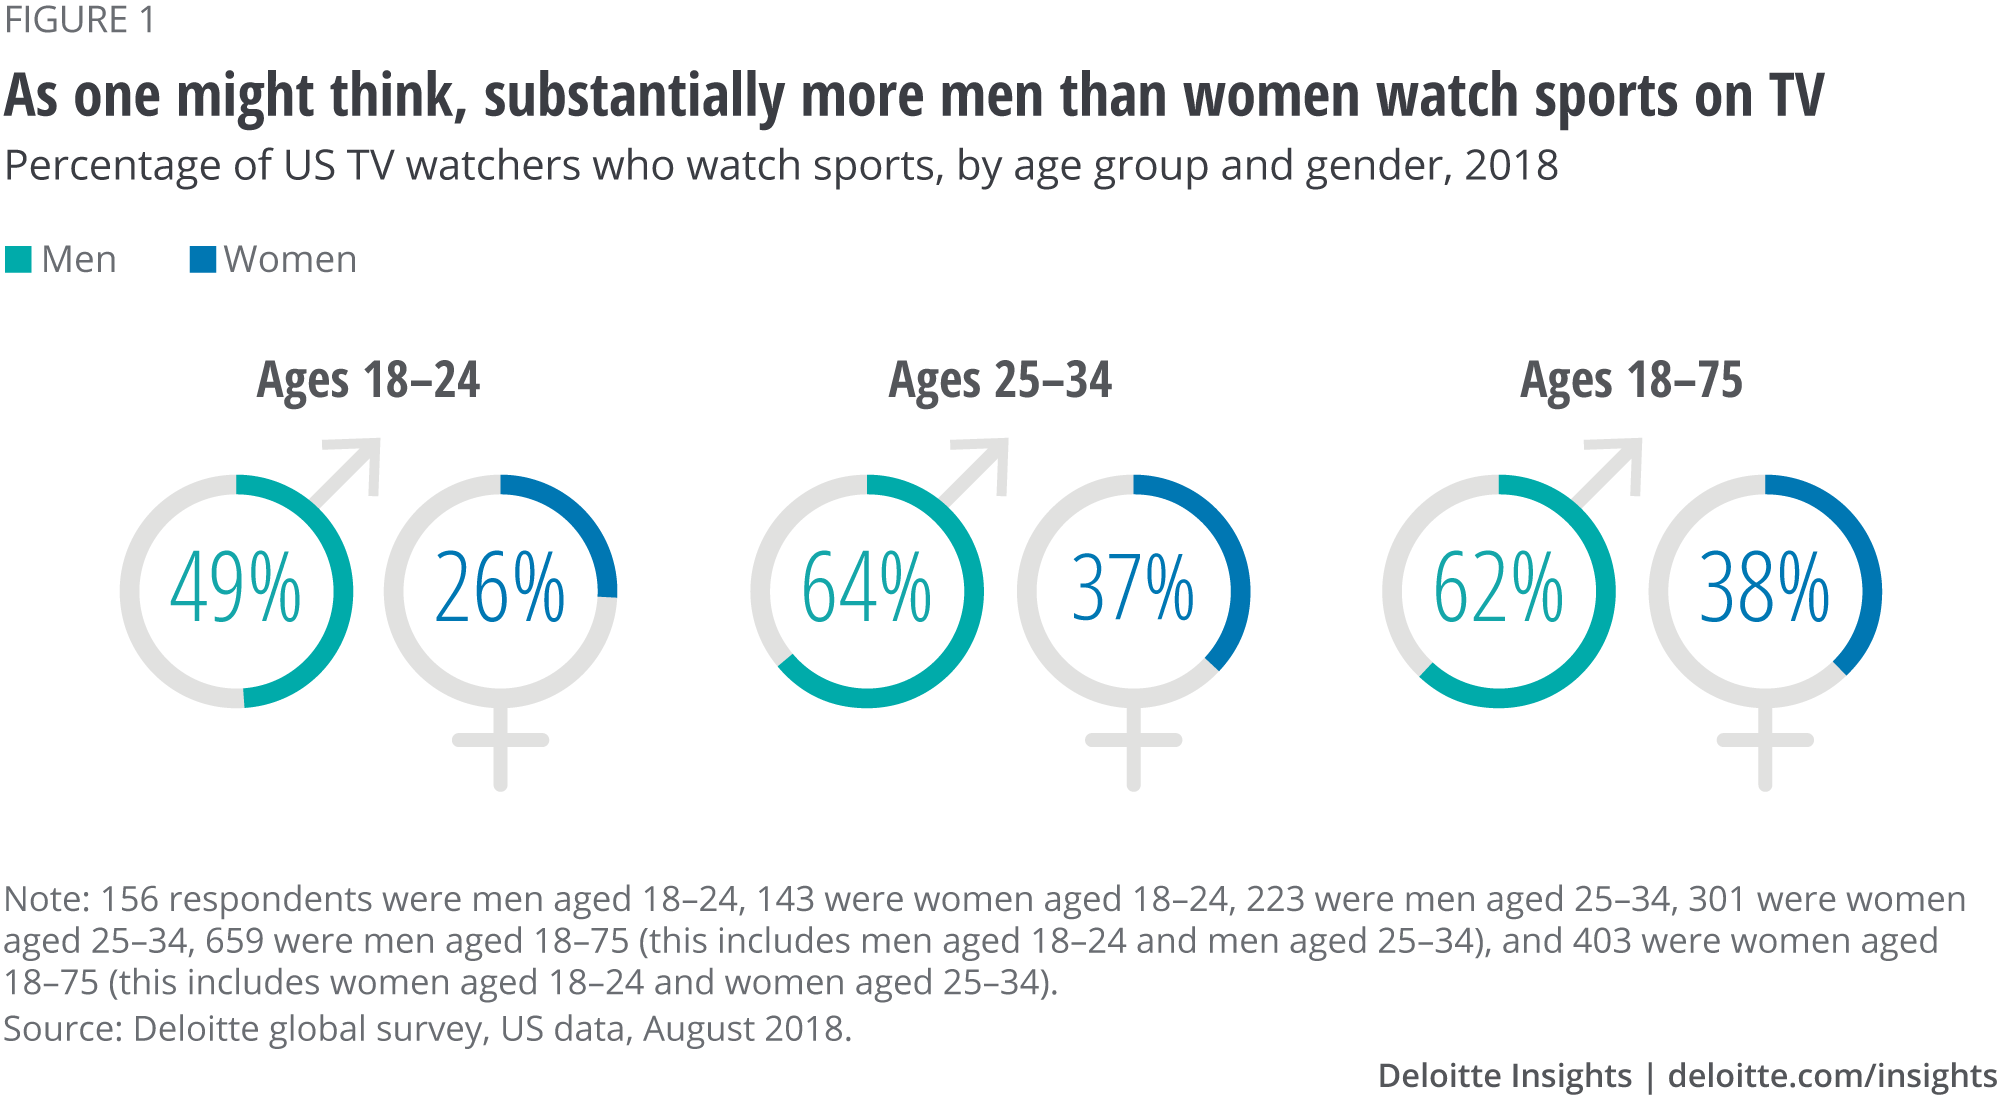 As one might think, substantially more men than women watch sports on TV